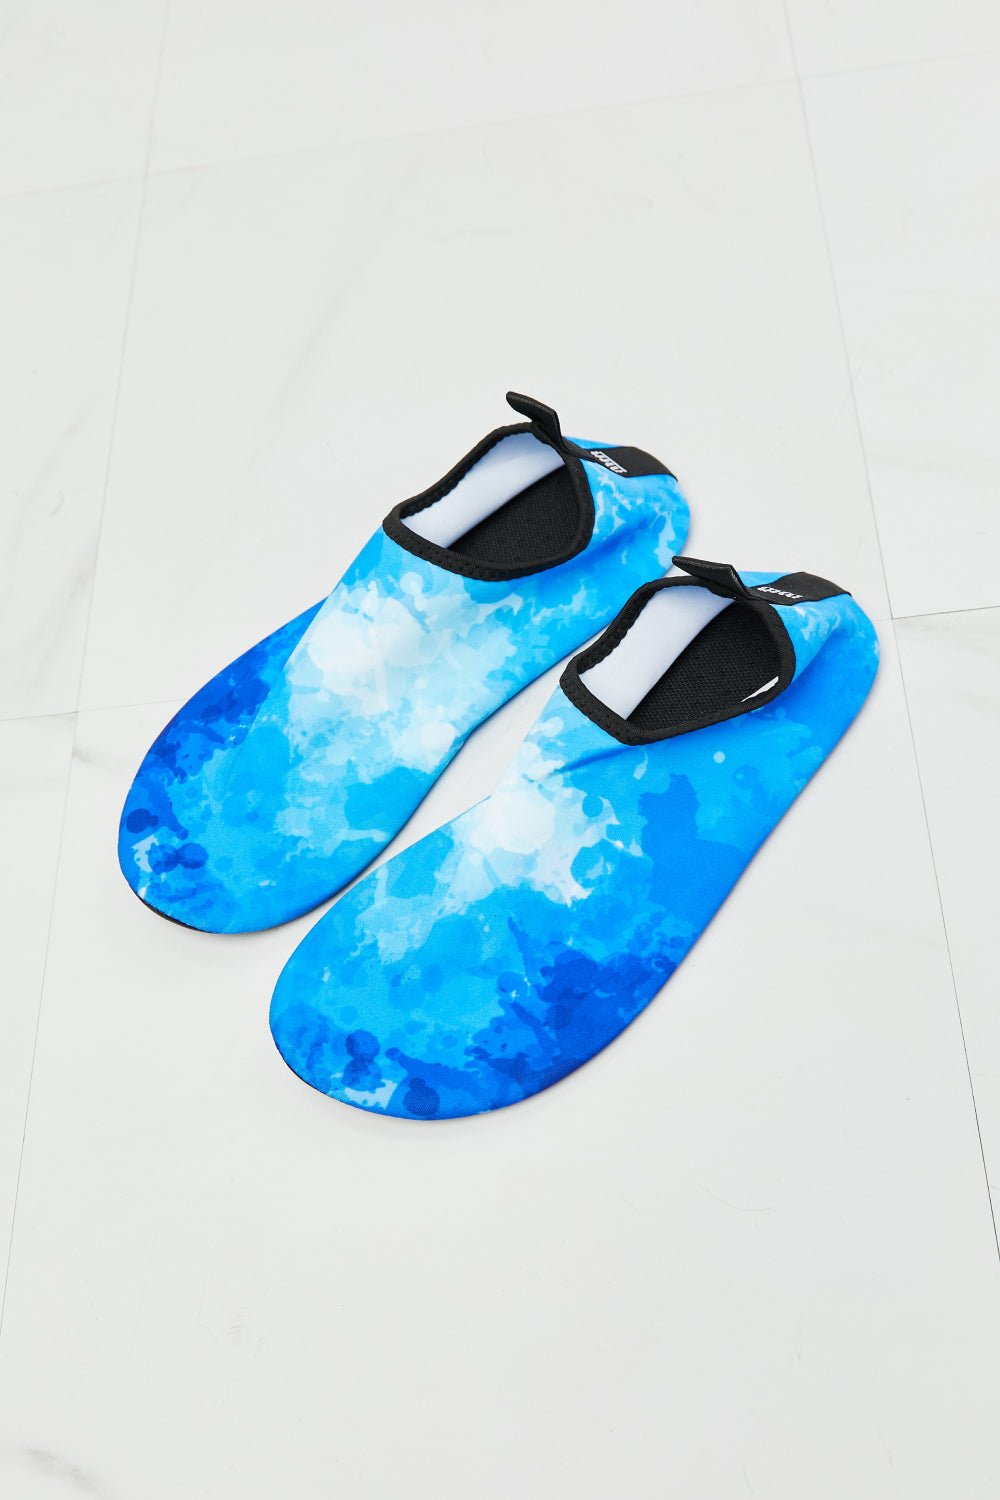 MMshoes On The Shore Water Shoes in Blue - Guy Christopher